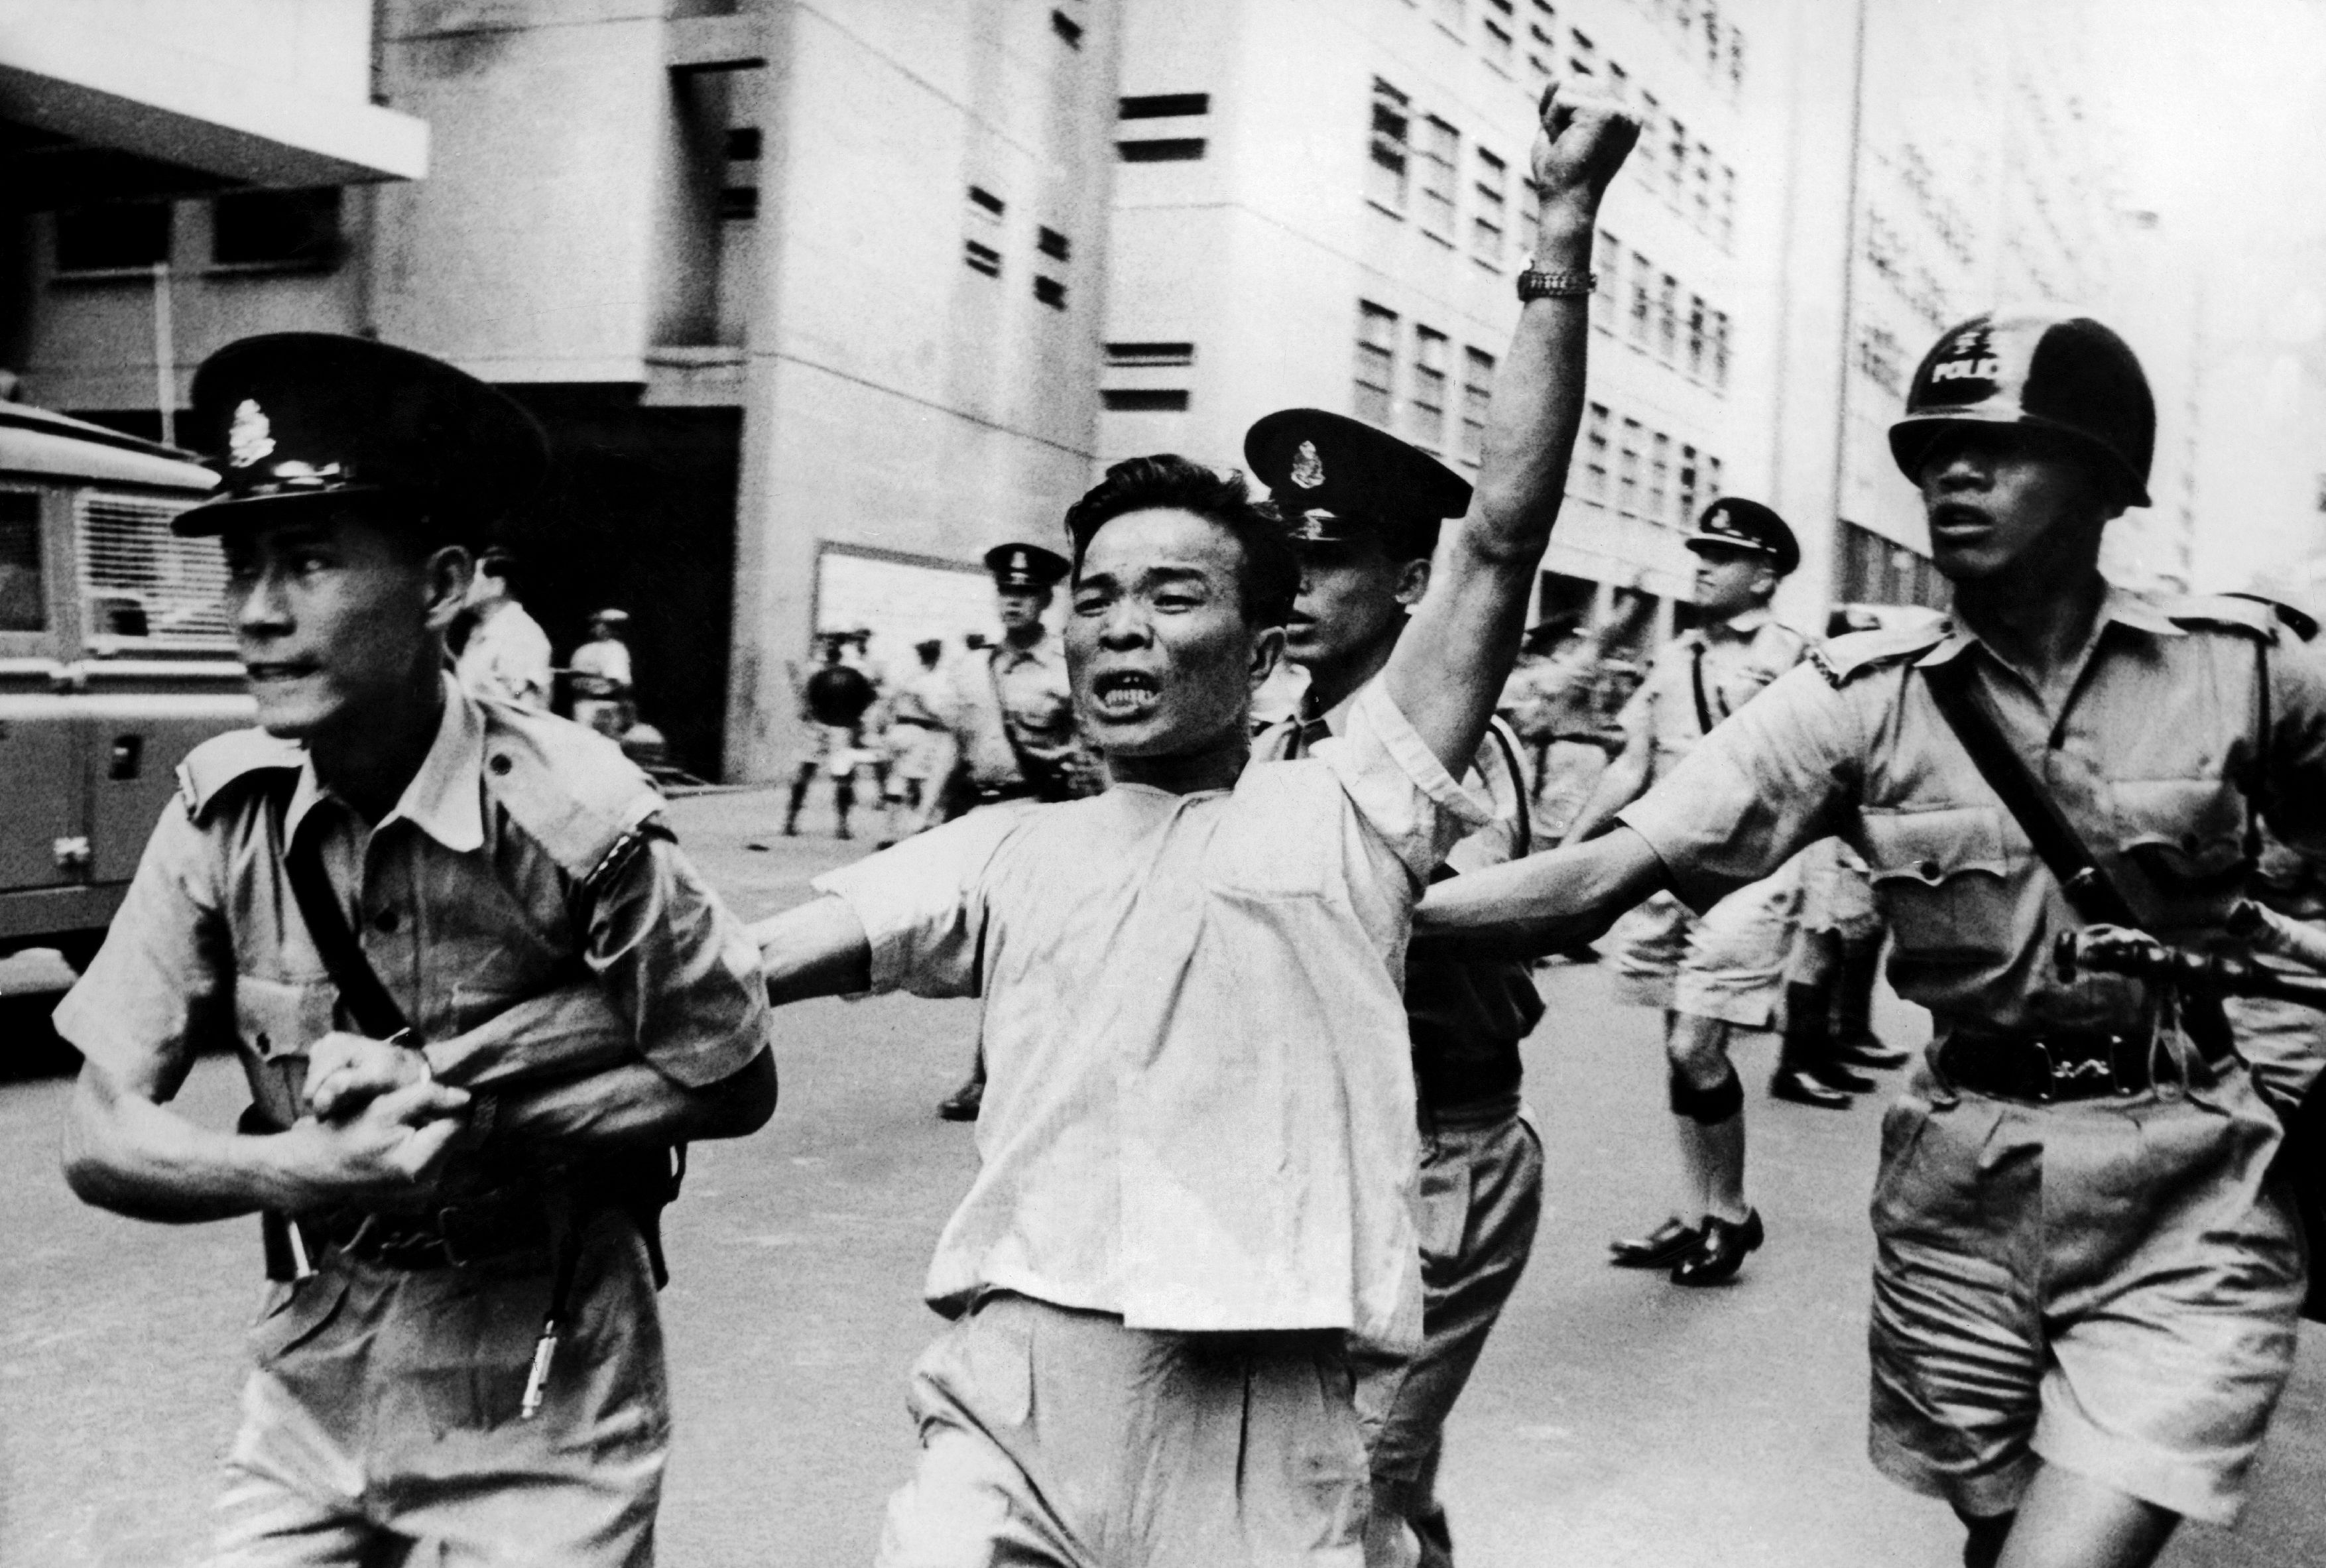 "Every aspiring statesman needs a creation myth, and the summer of 1967 was Tsang Yok-sing’s." A supporter of Mao Tse Tung and Communist China is arrested by during a demonstration in Hong Kong, on May 18, 1967. (Keystone-France—Gamma-Keystone via Getty Images)